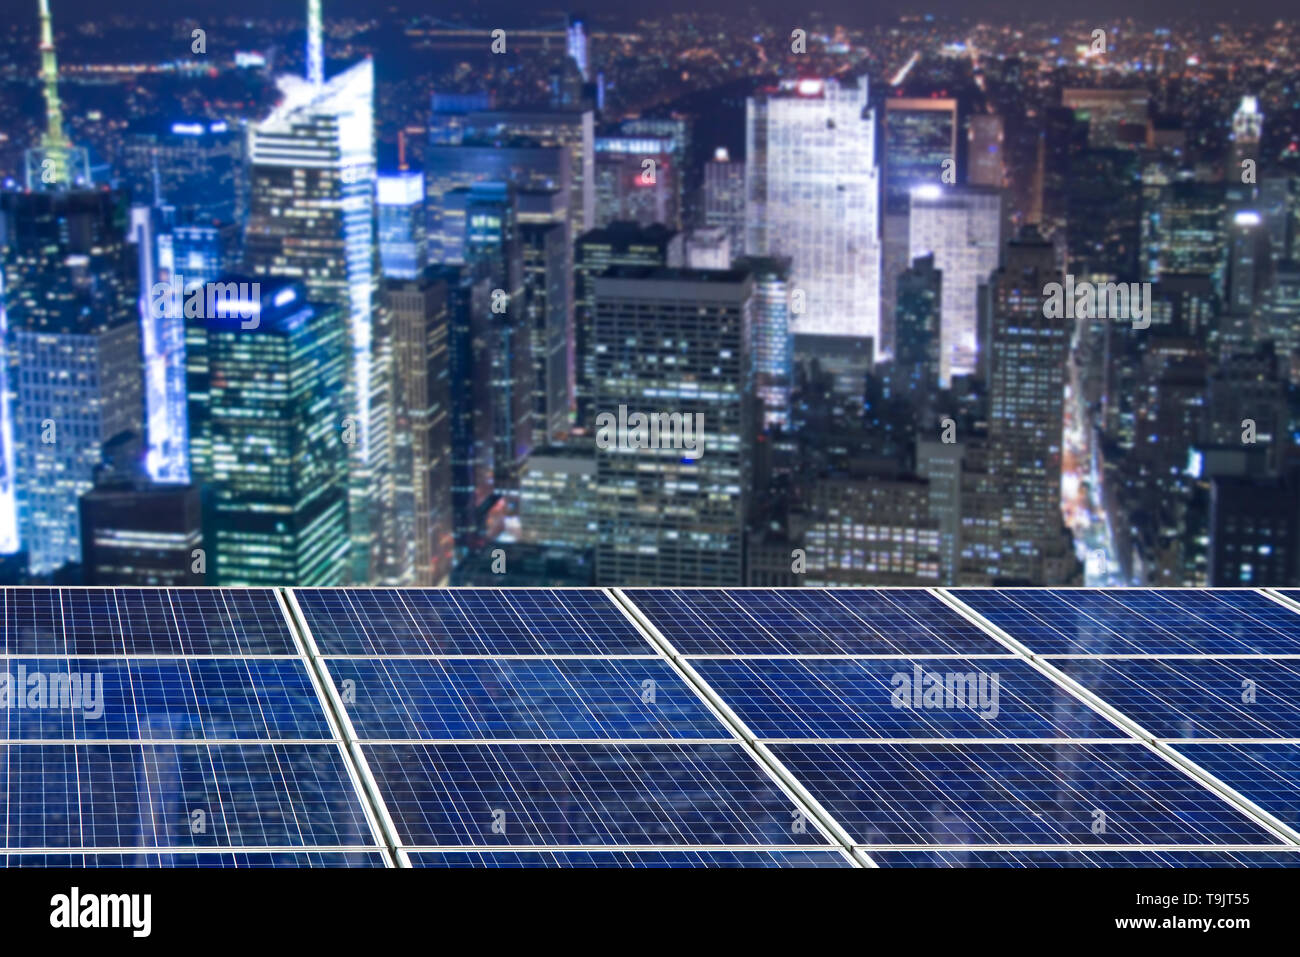 Blue solar cell panels, New York cityscape illuminated at night in the background Stock Photo